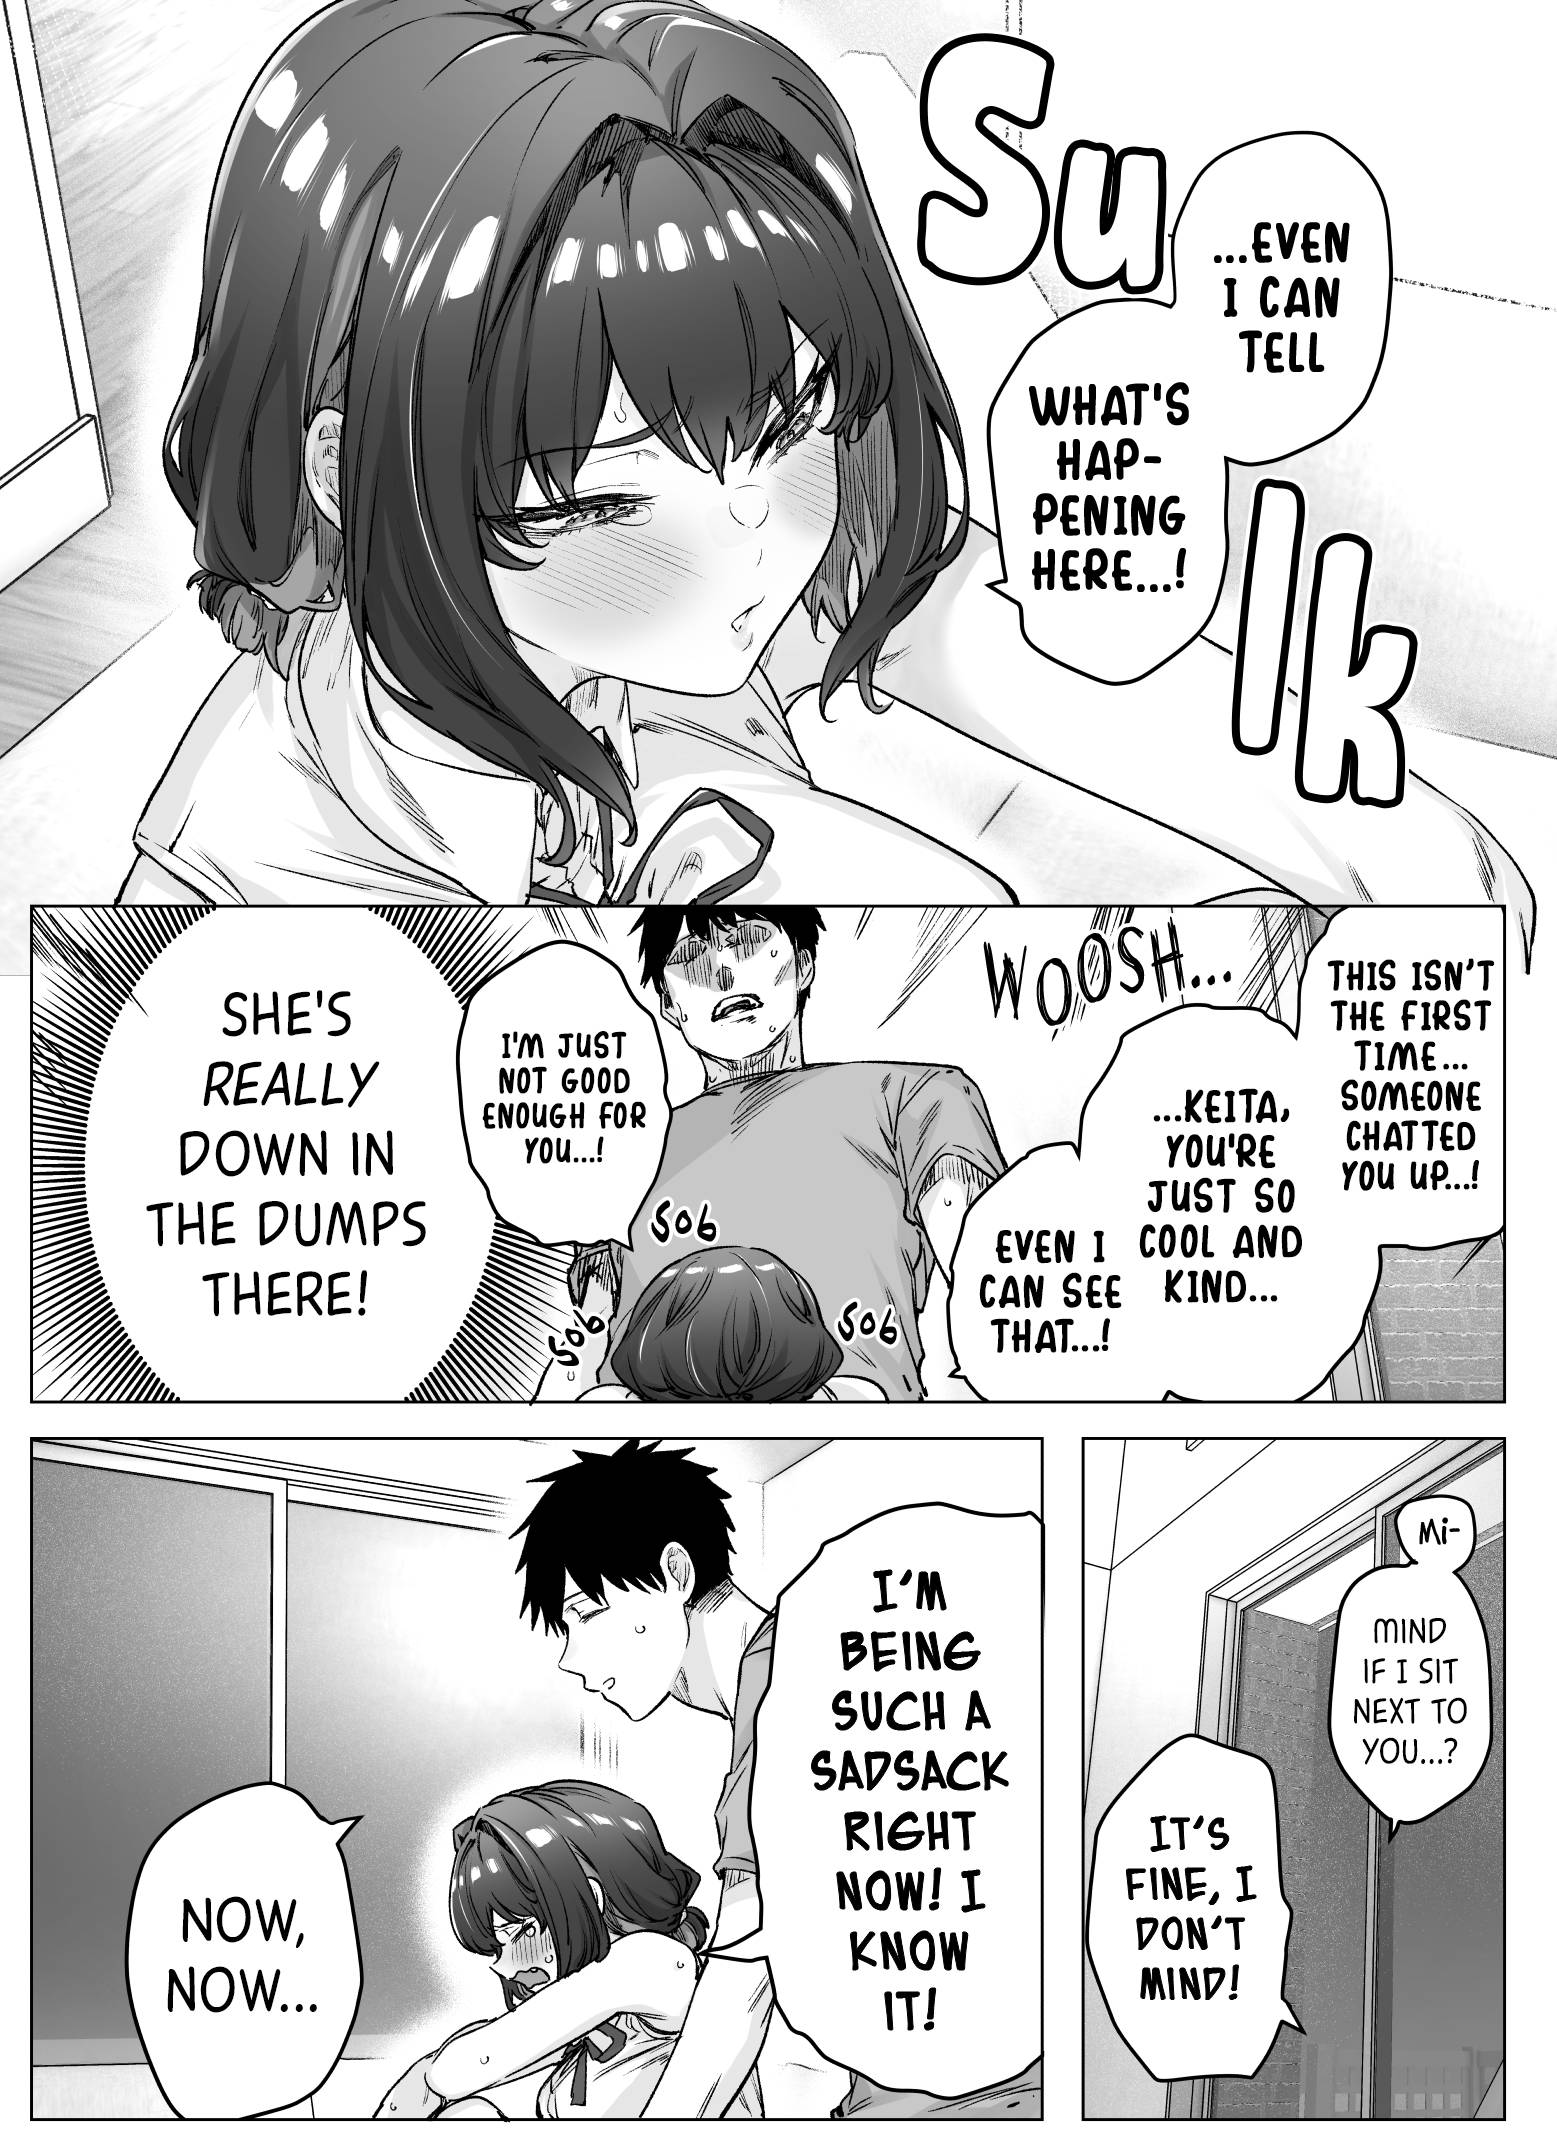 The Tsuntsuntsuntsuntsuntsun Tsuntsuntsuntsuntsundere Girl Getting Less And Less Tsun Day By Day - chapter 87 - #1